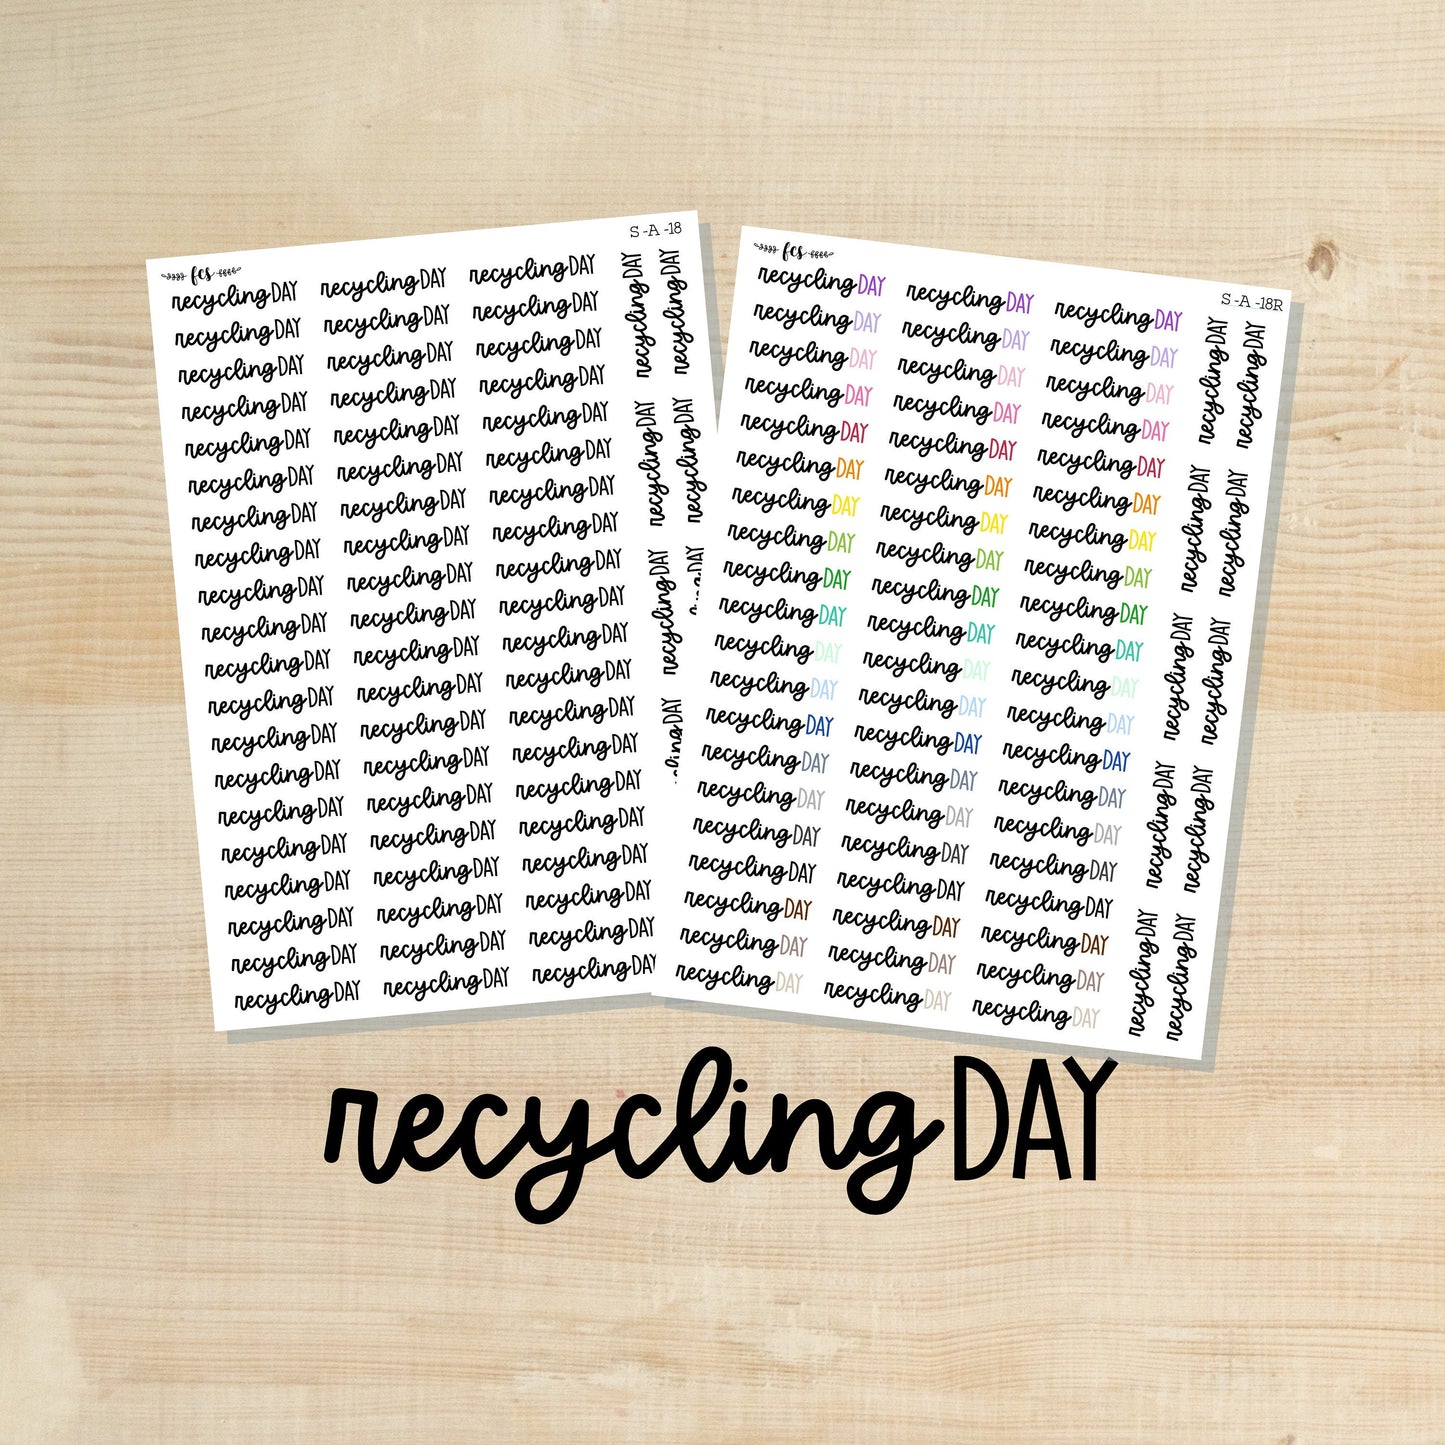 S-A-18 || RECYCLING DAY script stickers